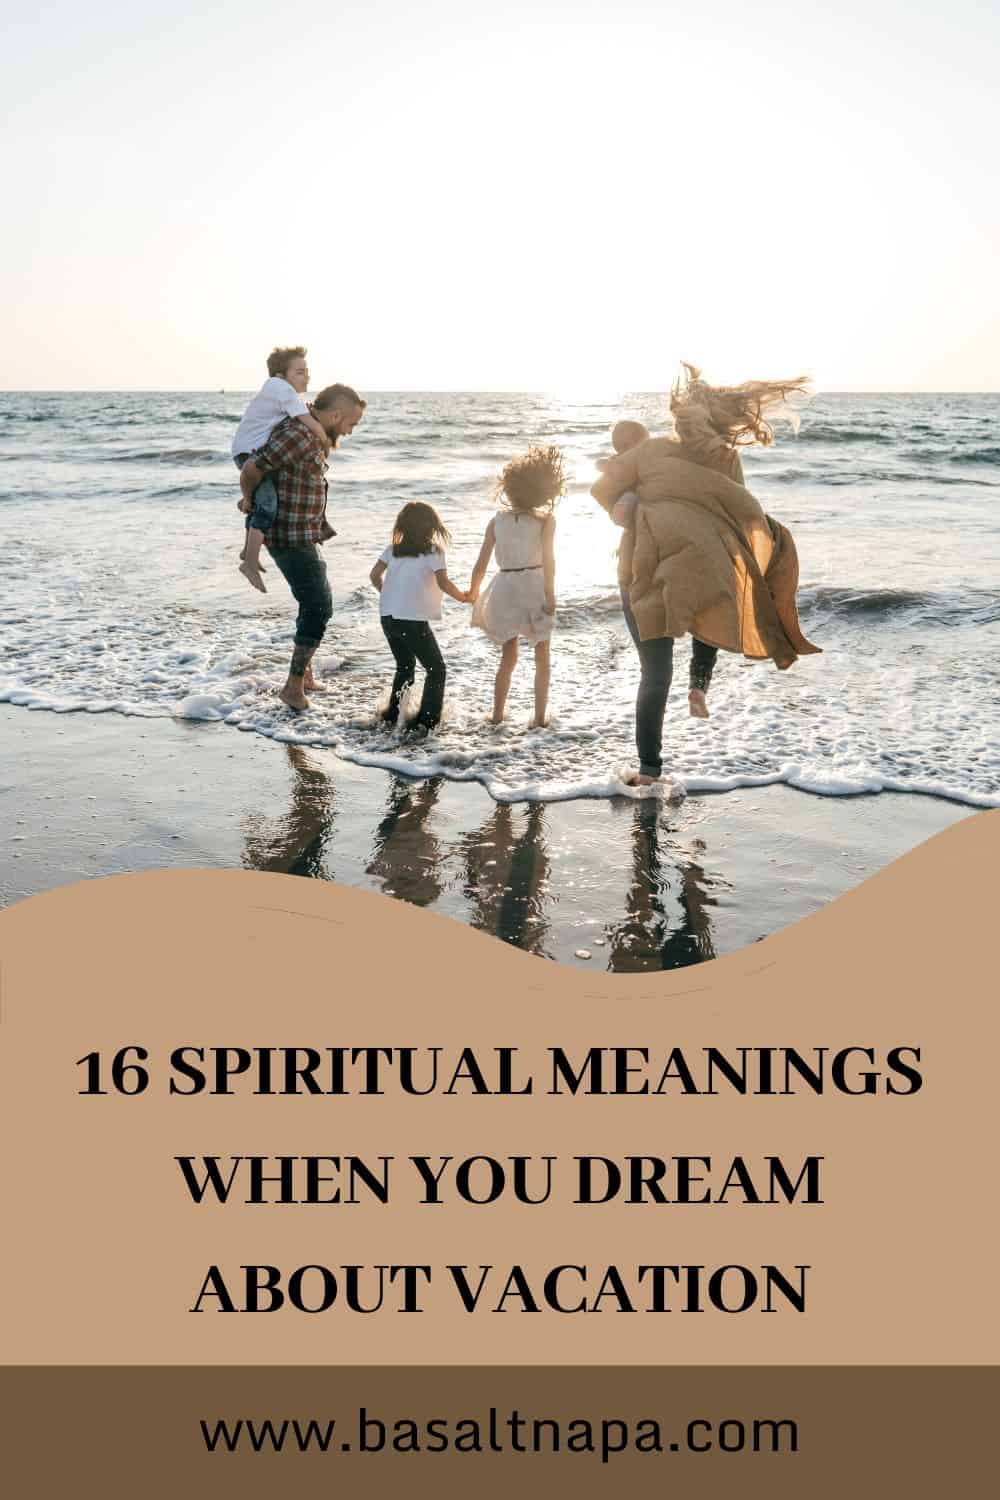 16 Spiritual Meanings When You Dream About Vacation